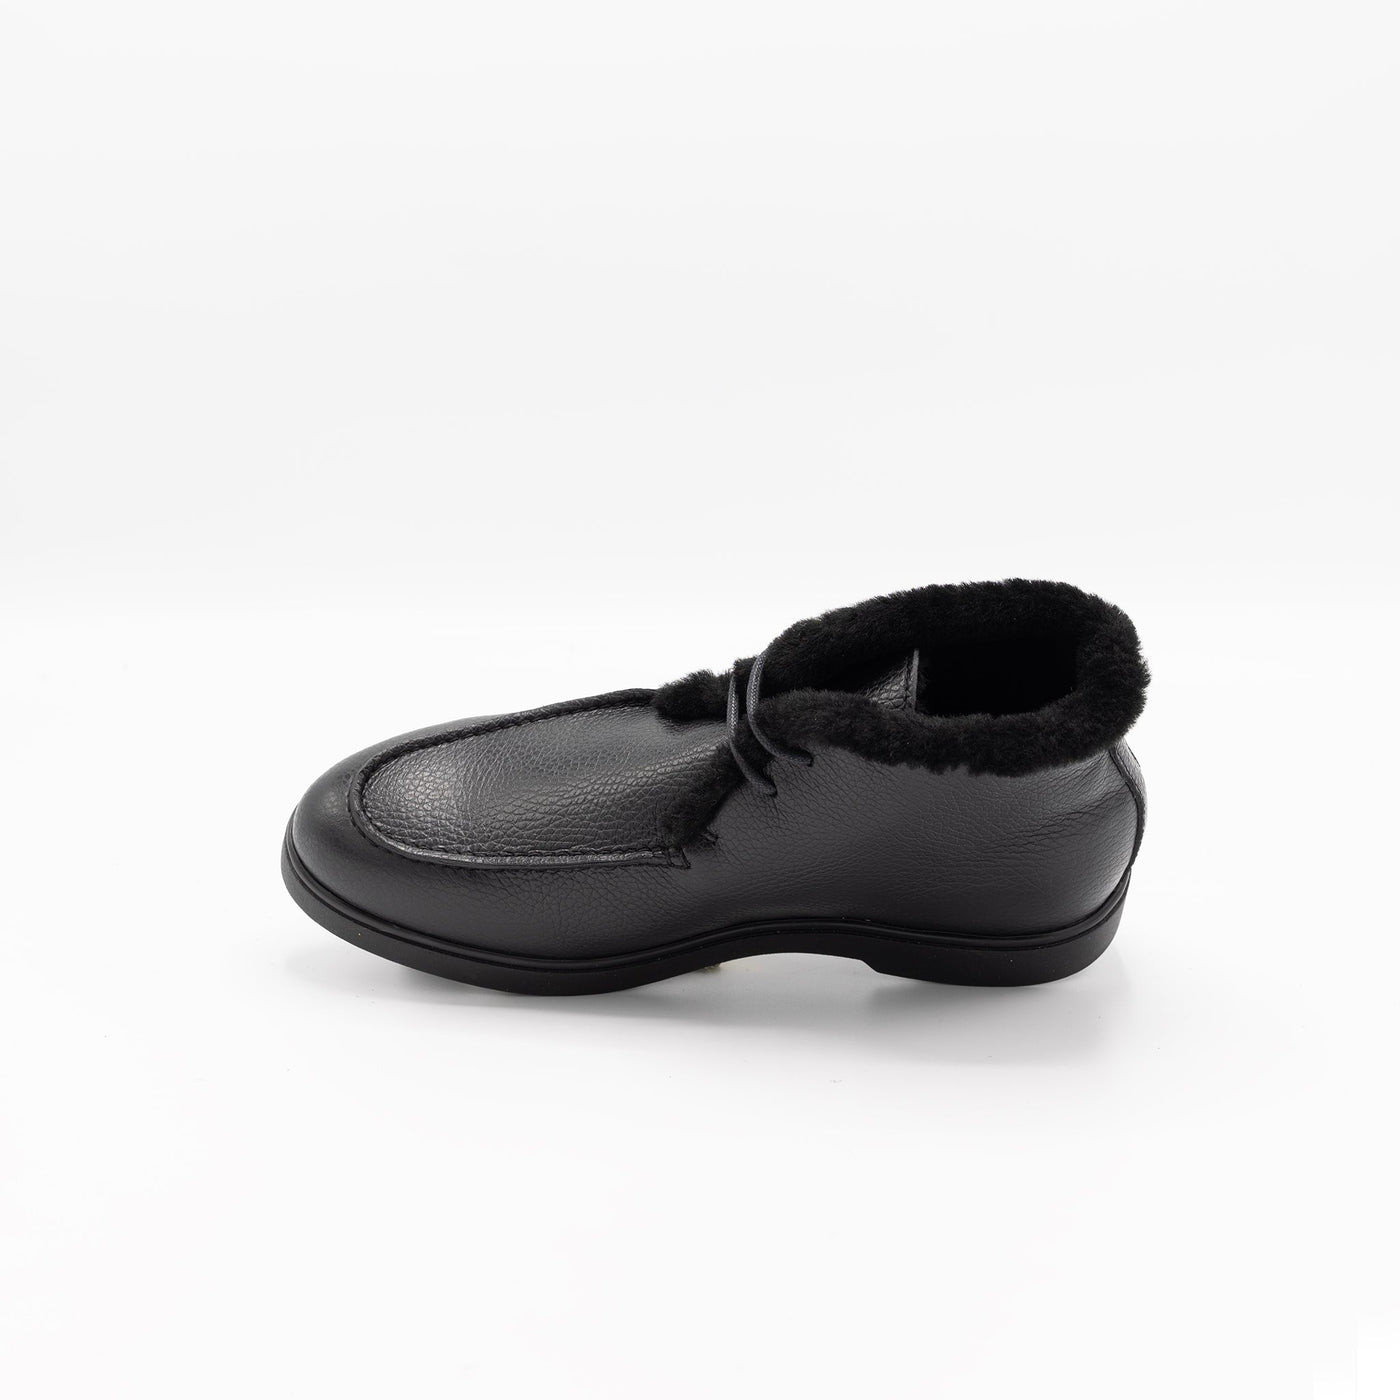 Black Leather Shearling Moccasins